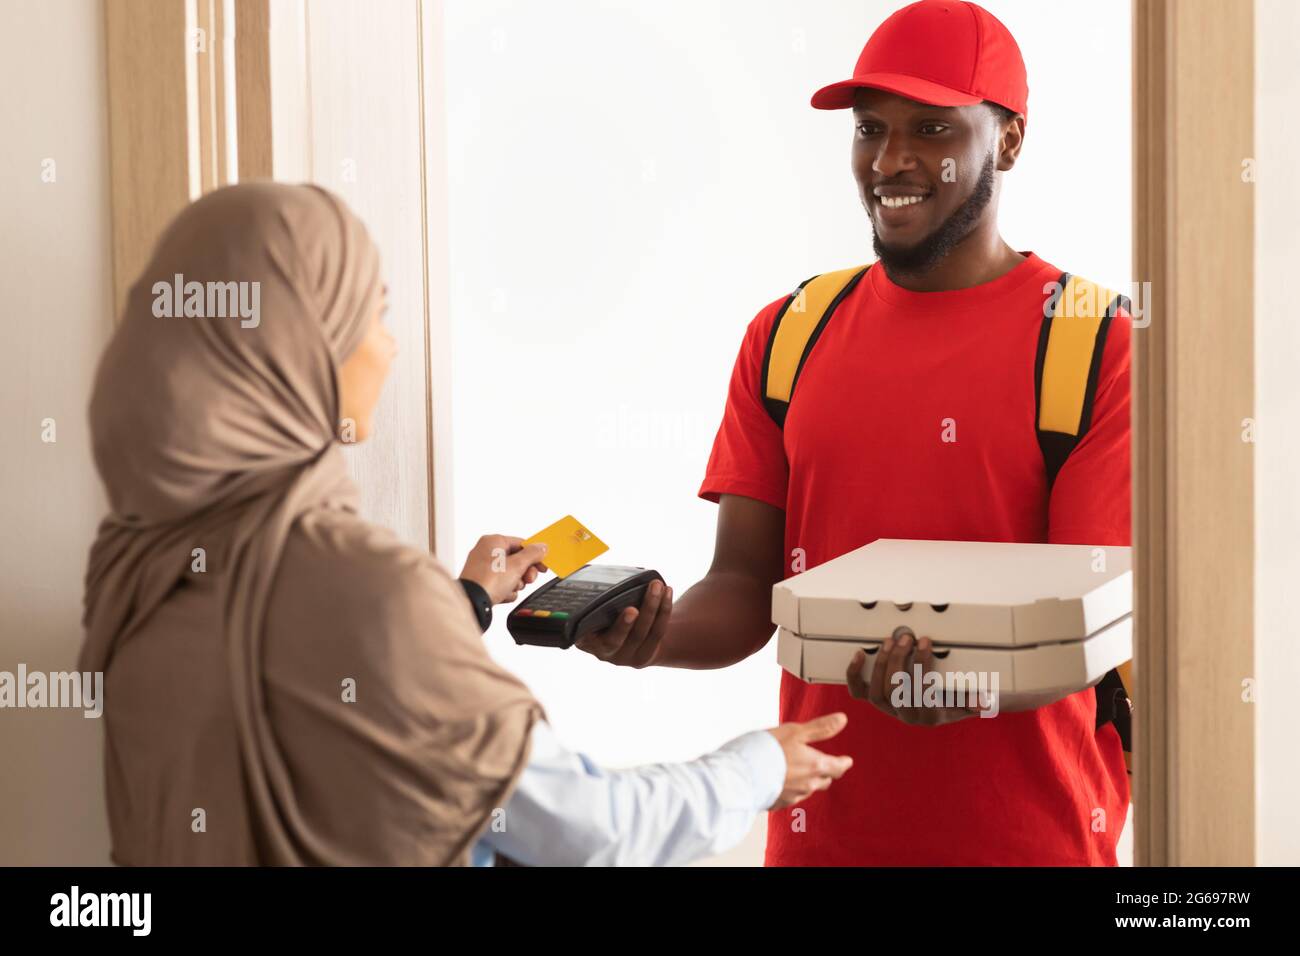 Smiling deliveryman holding POS machine, woman paying with card Stock Photo